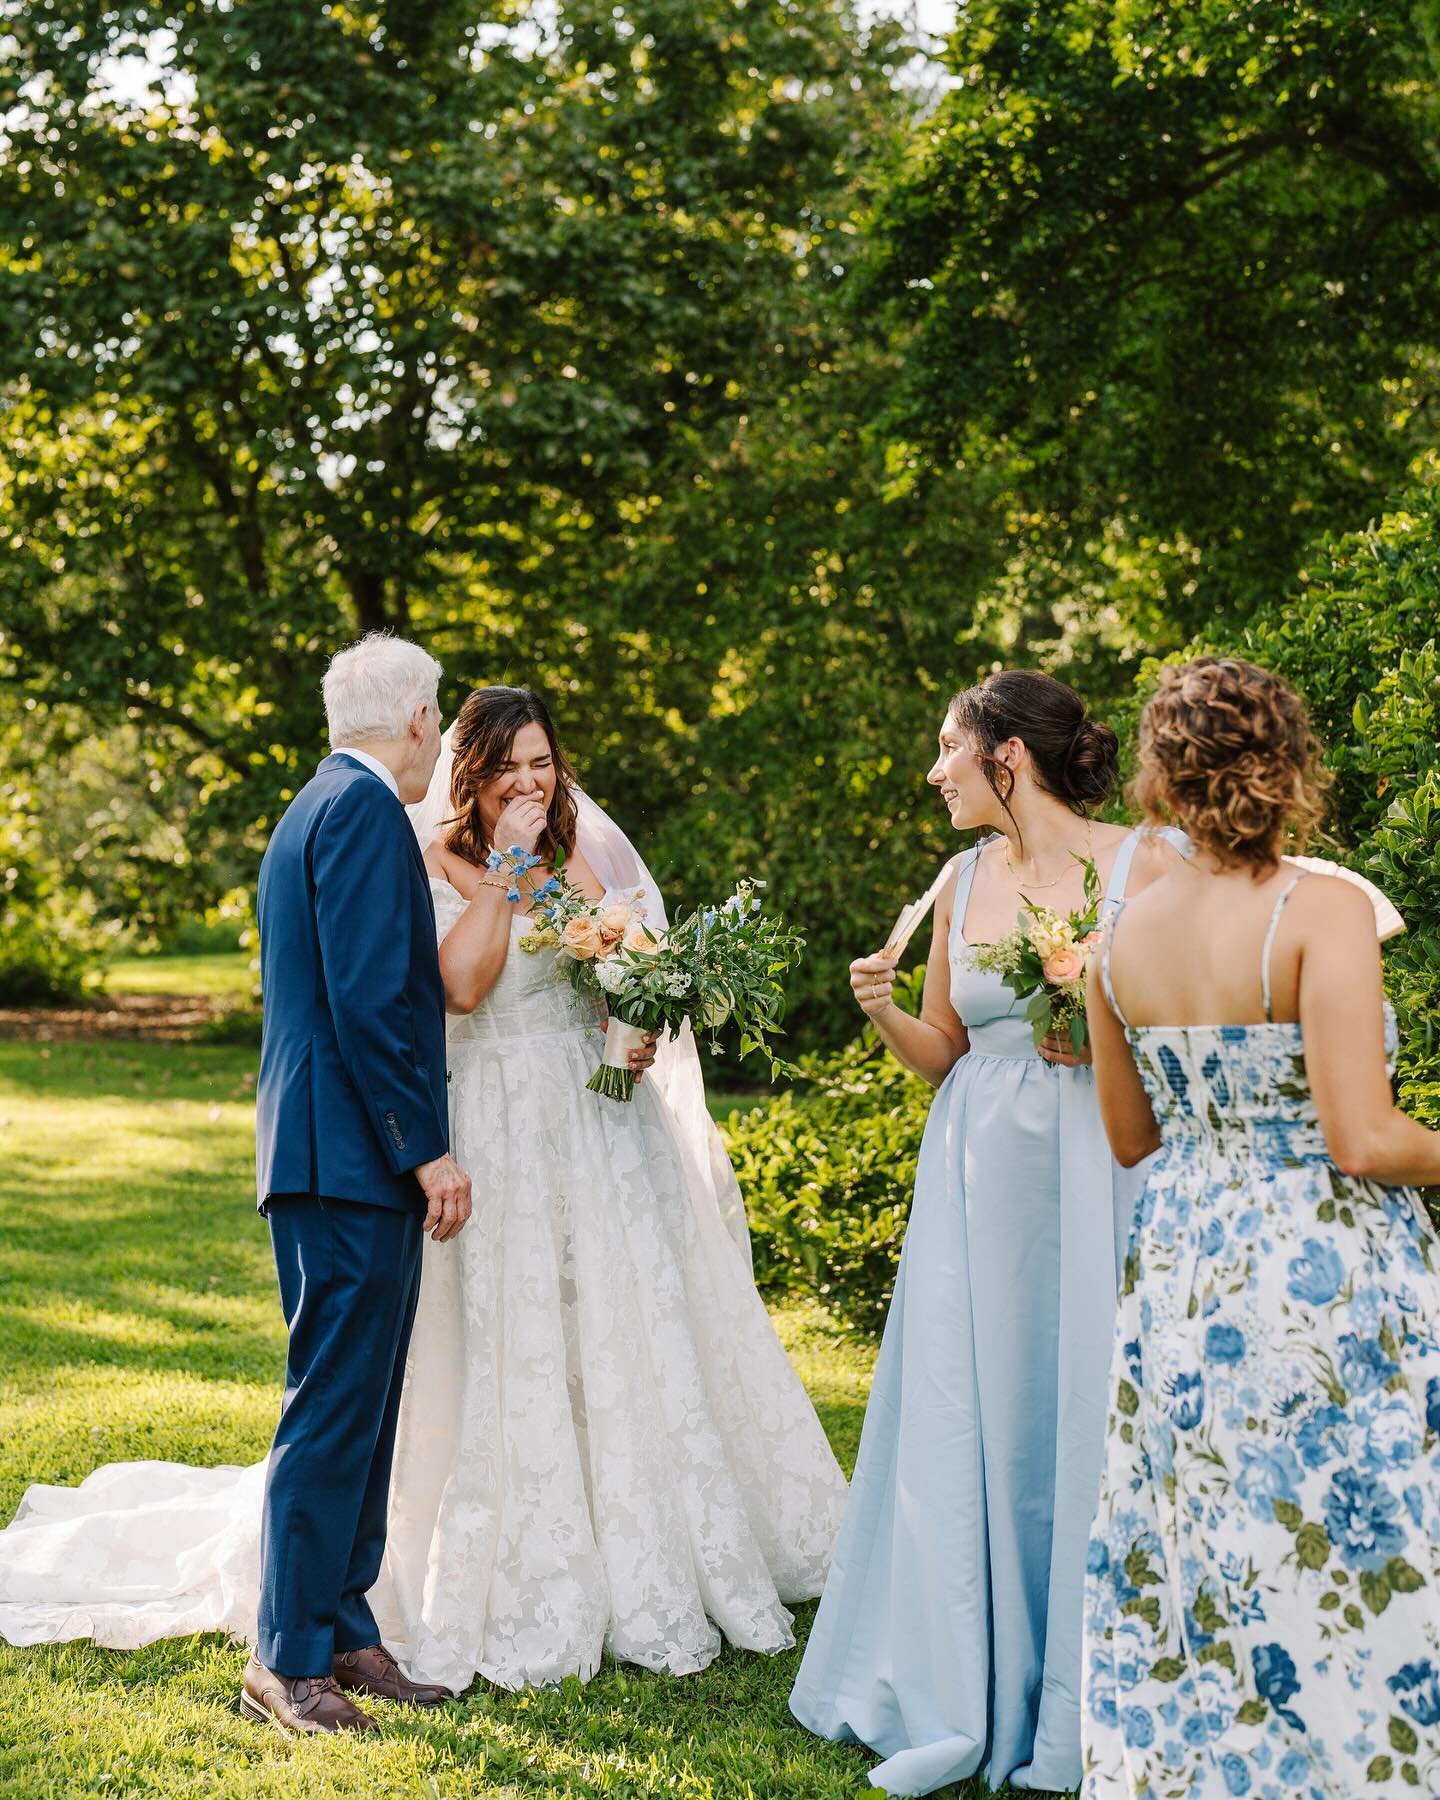 We always talk about the cute moments just before the ceremony. These are some of those. Whether you do a first look or not, these moments are always special 🥹

#phillyweddingphotographer #phillyweddingphotographers #phillywedding #philadelphiaweddi